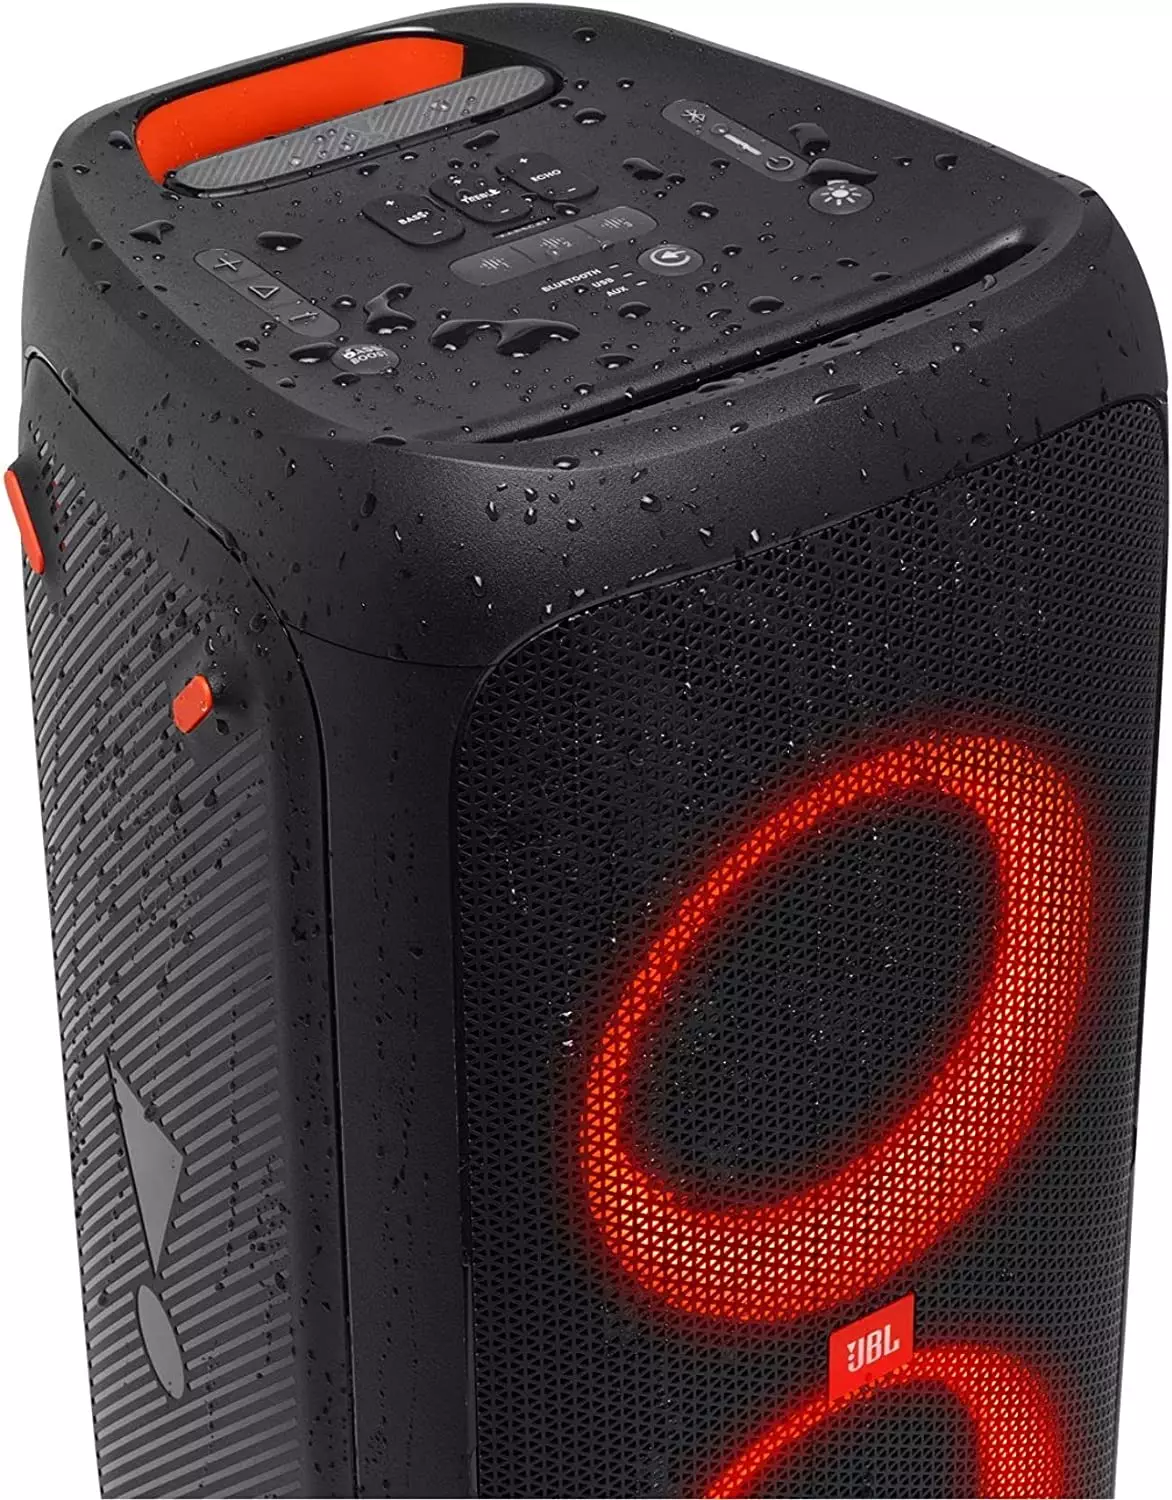 The Epic Jbl Partybox 1000 Is An Absolute Awesome Show Stopper